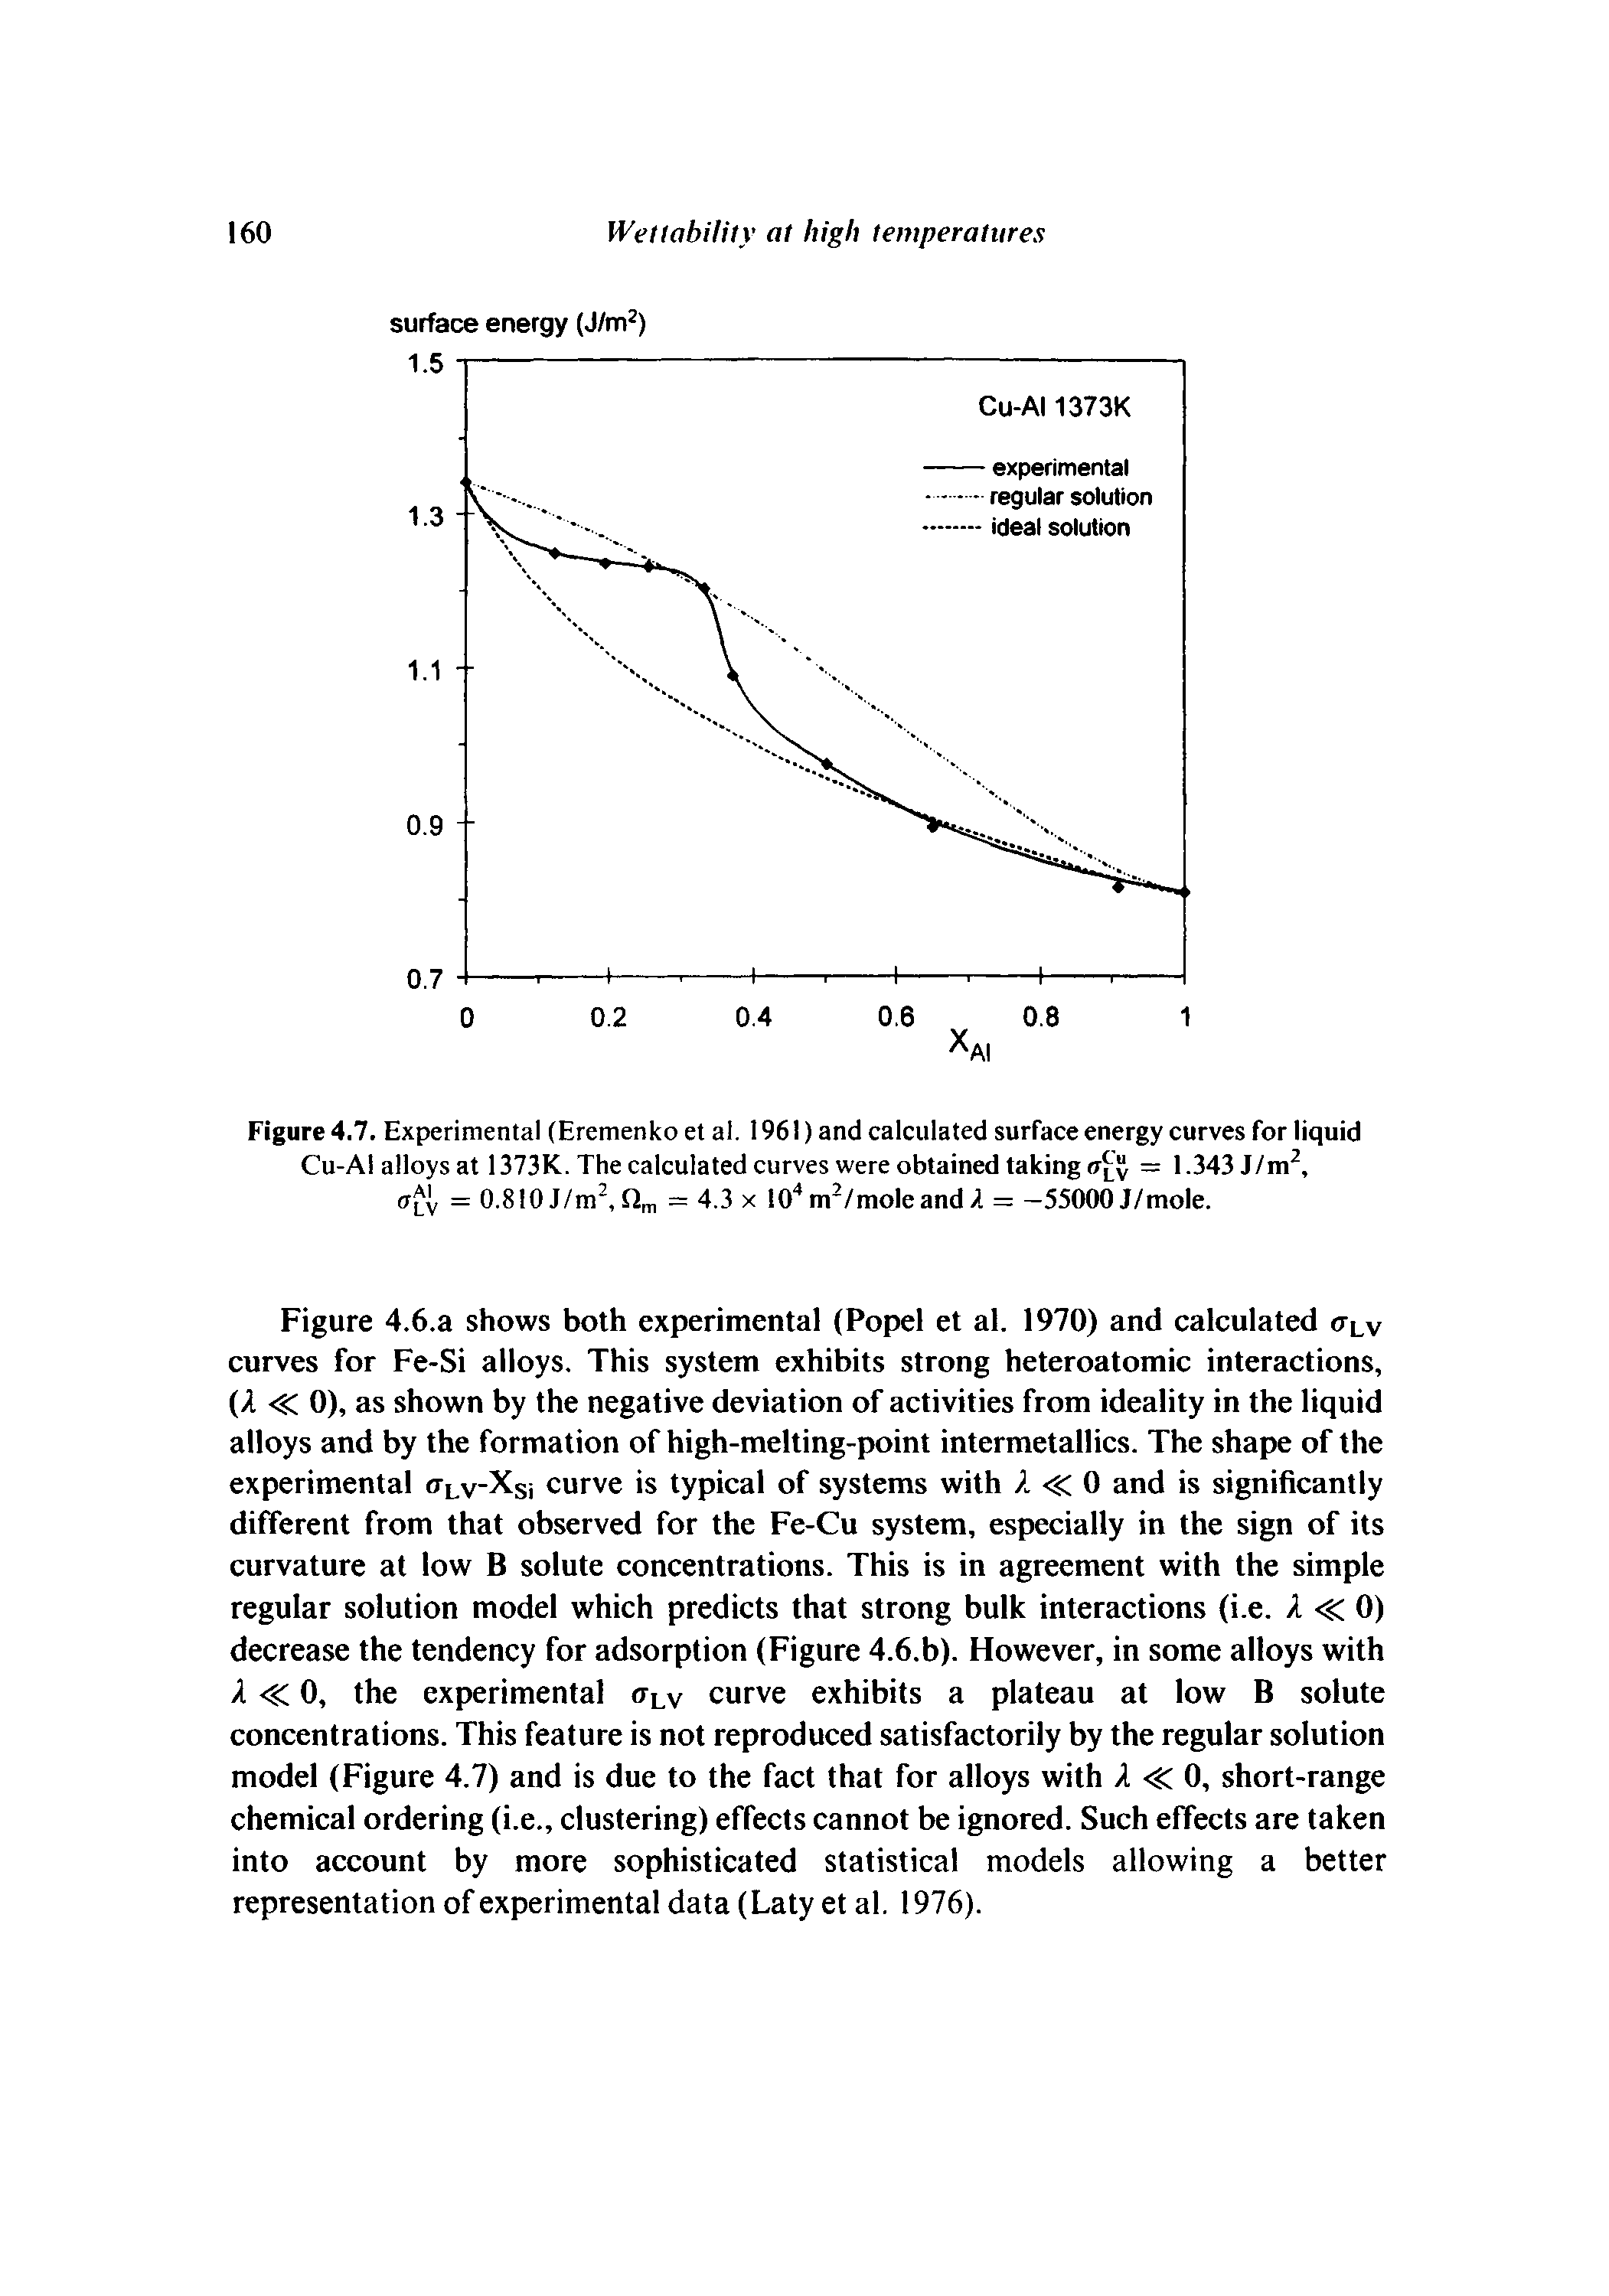 Figure 4.7. Experimental (Eremenko et al. 1961) and calculated surface energy curves for liquid Cu-AI alloys at 1373K. The calculated curves were obtained taking <Tlv = l-343J/m2, cr v = 0.810 J/m2, Qm = 4.3 x 104m2/moleand A = —55000 J/mole.